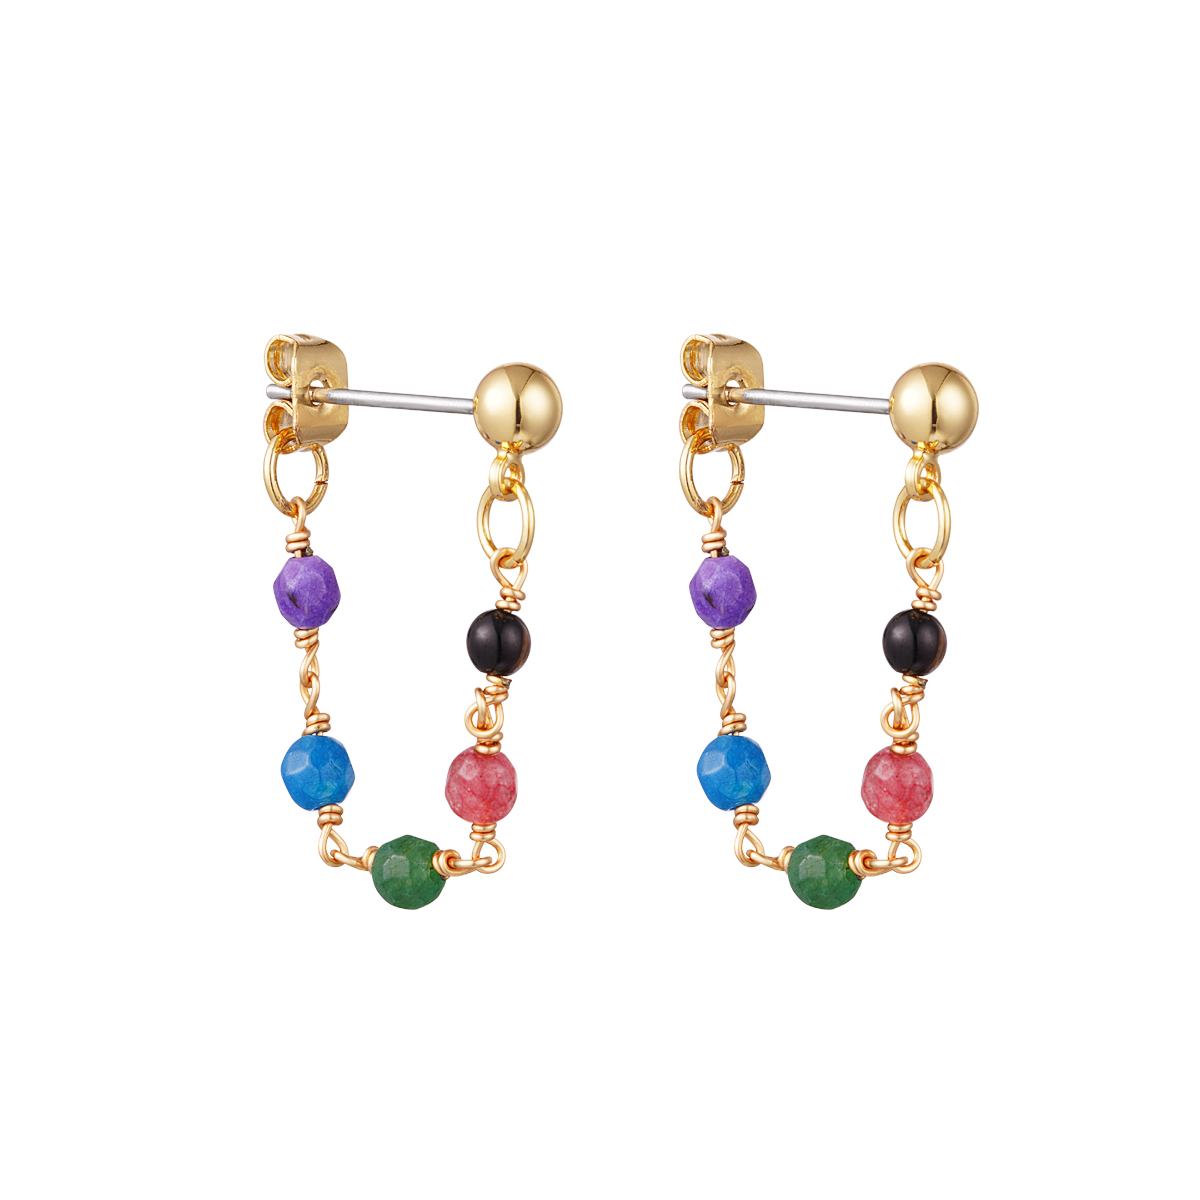 Earrings with chain and stones